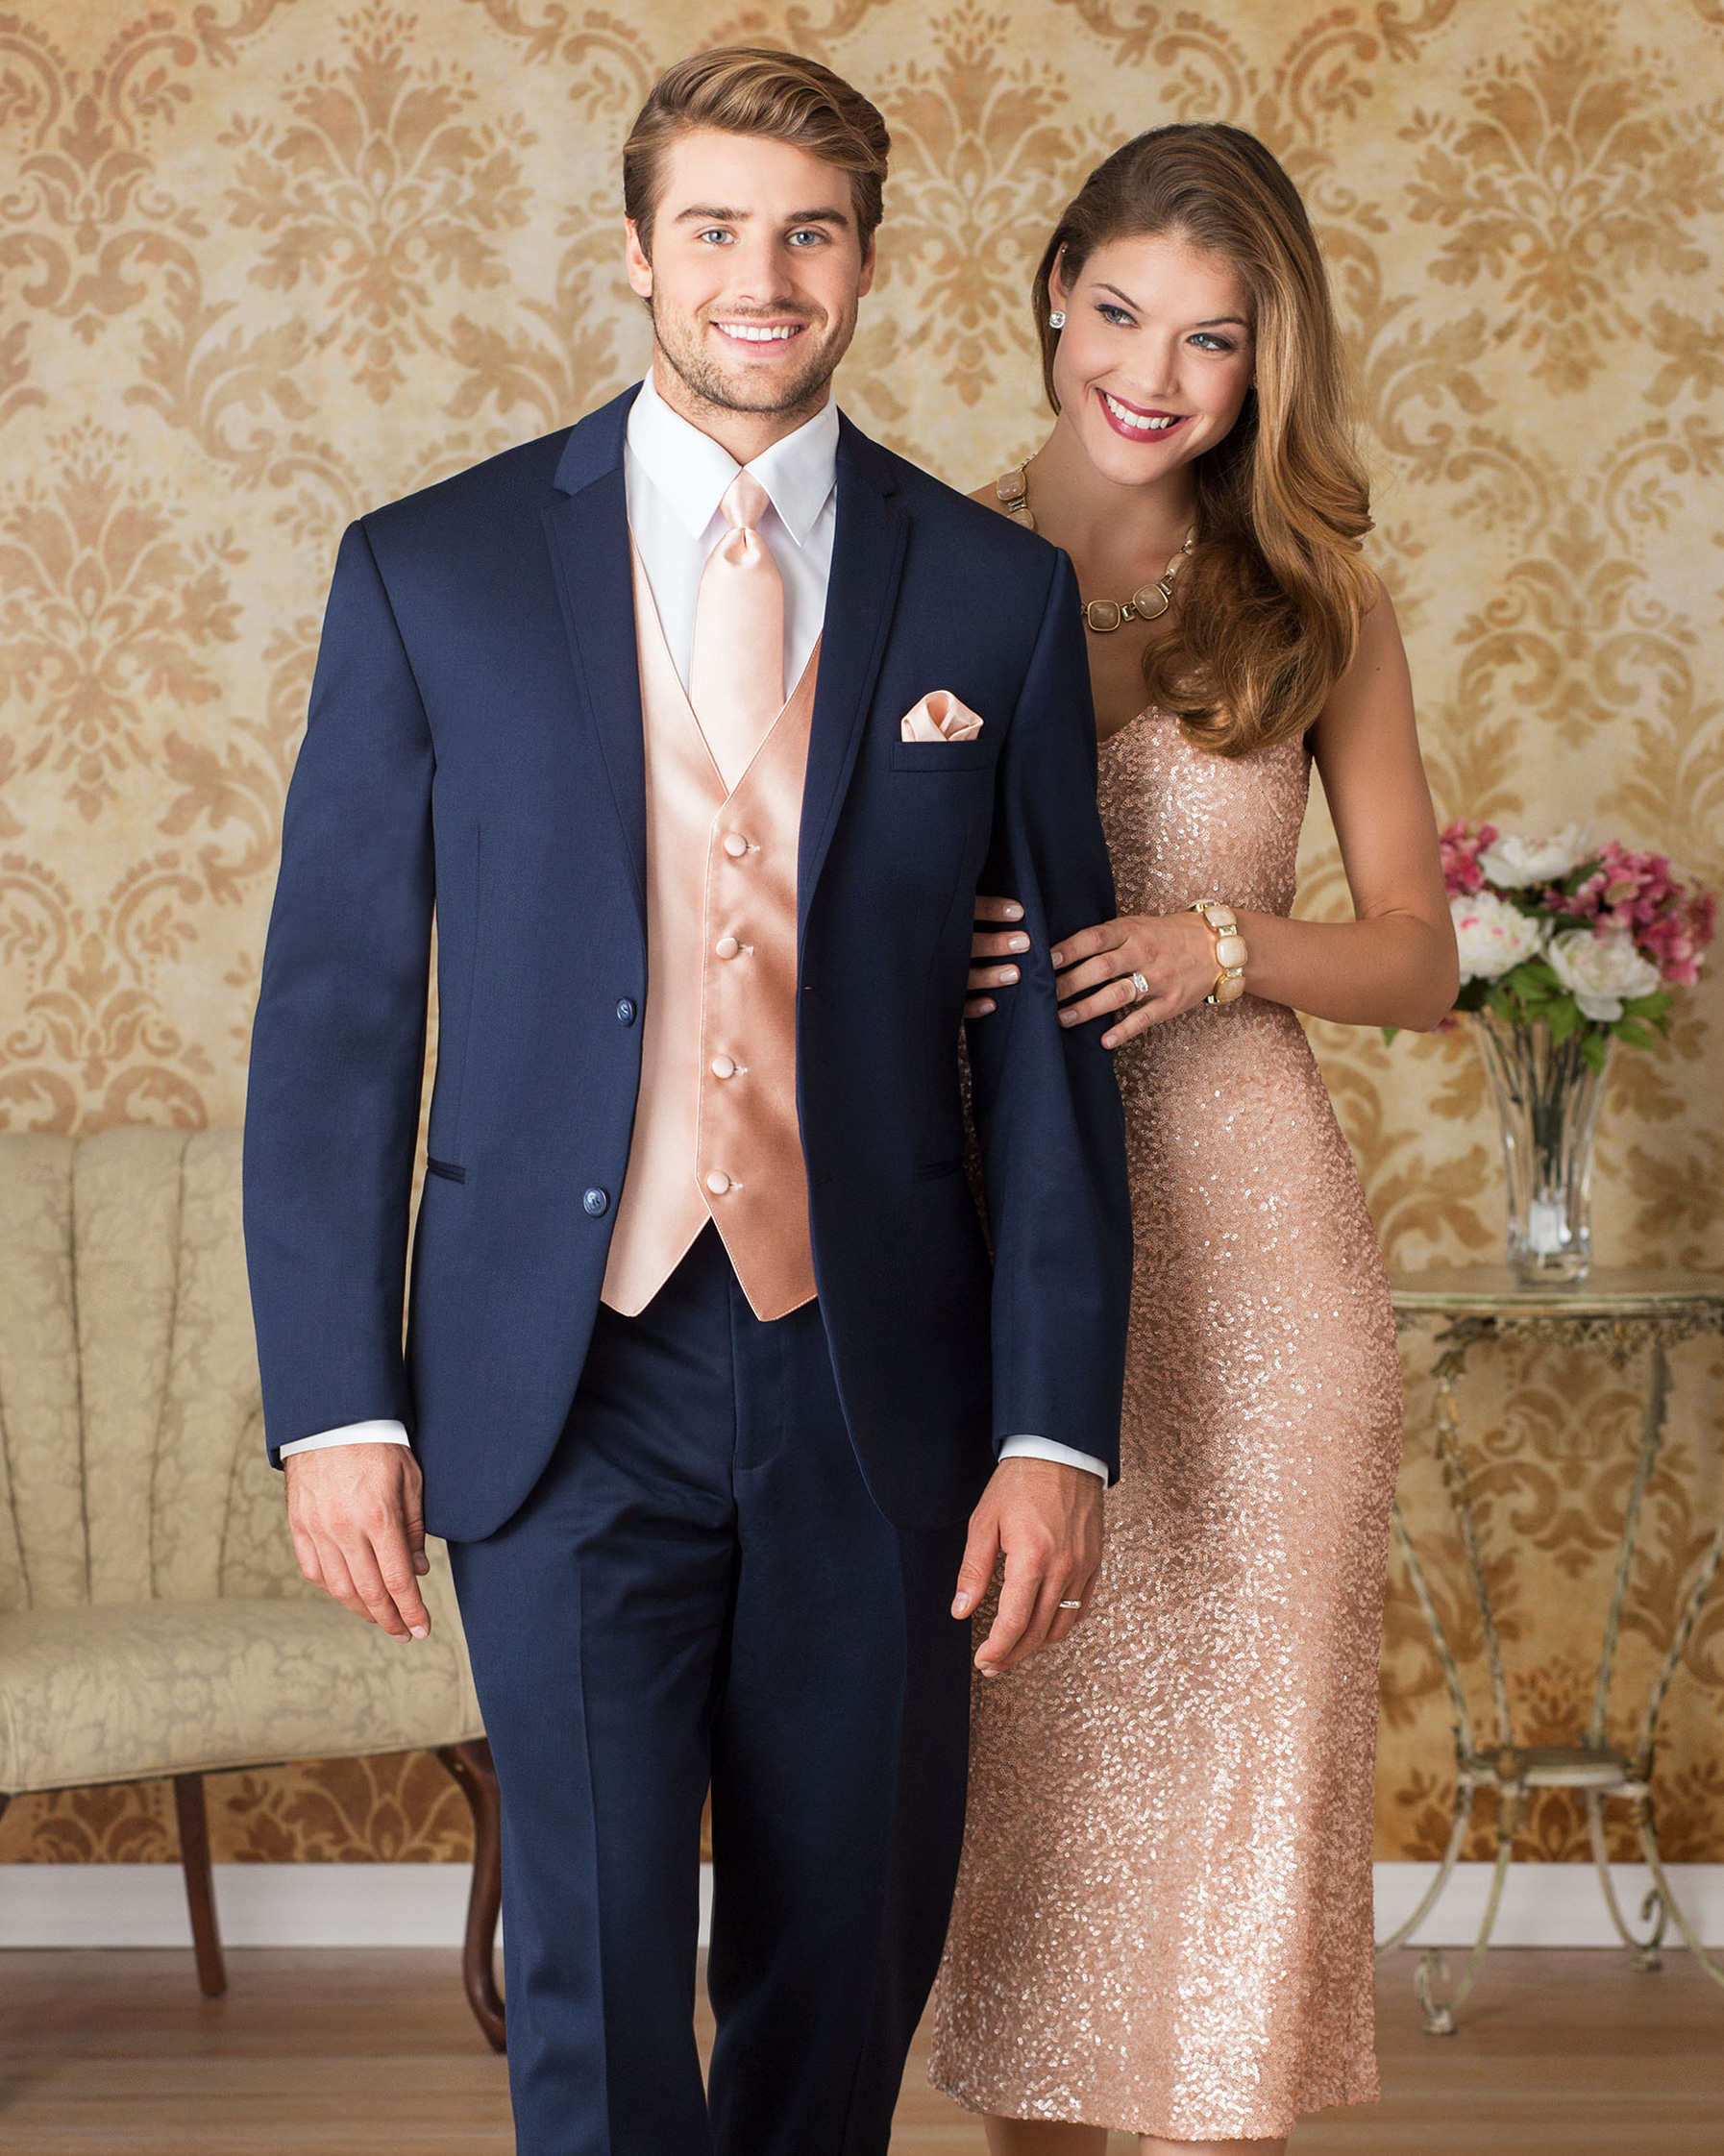 ormal black couples matching outfit 2 50+ Stylish Formal Matching Outfits for Couples - 2